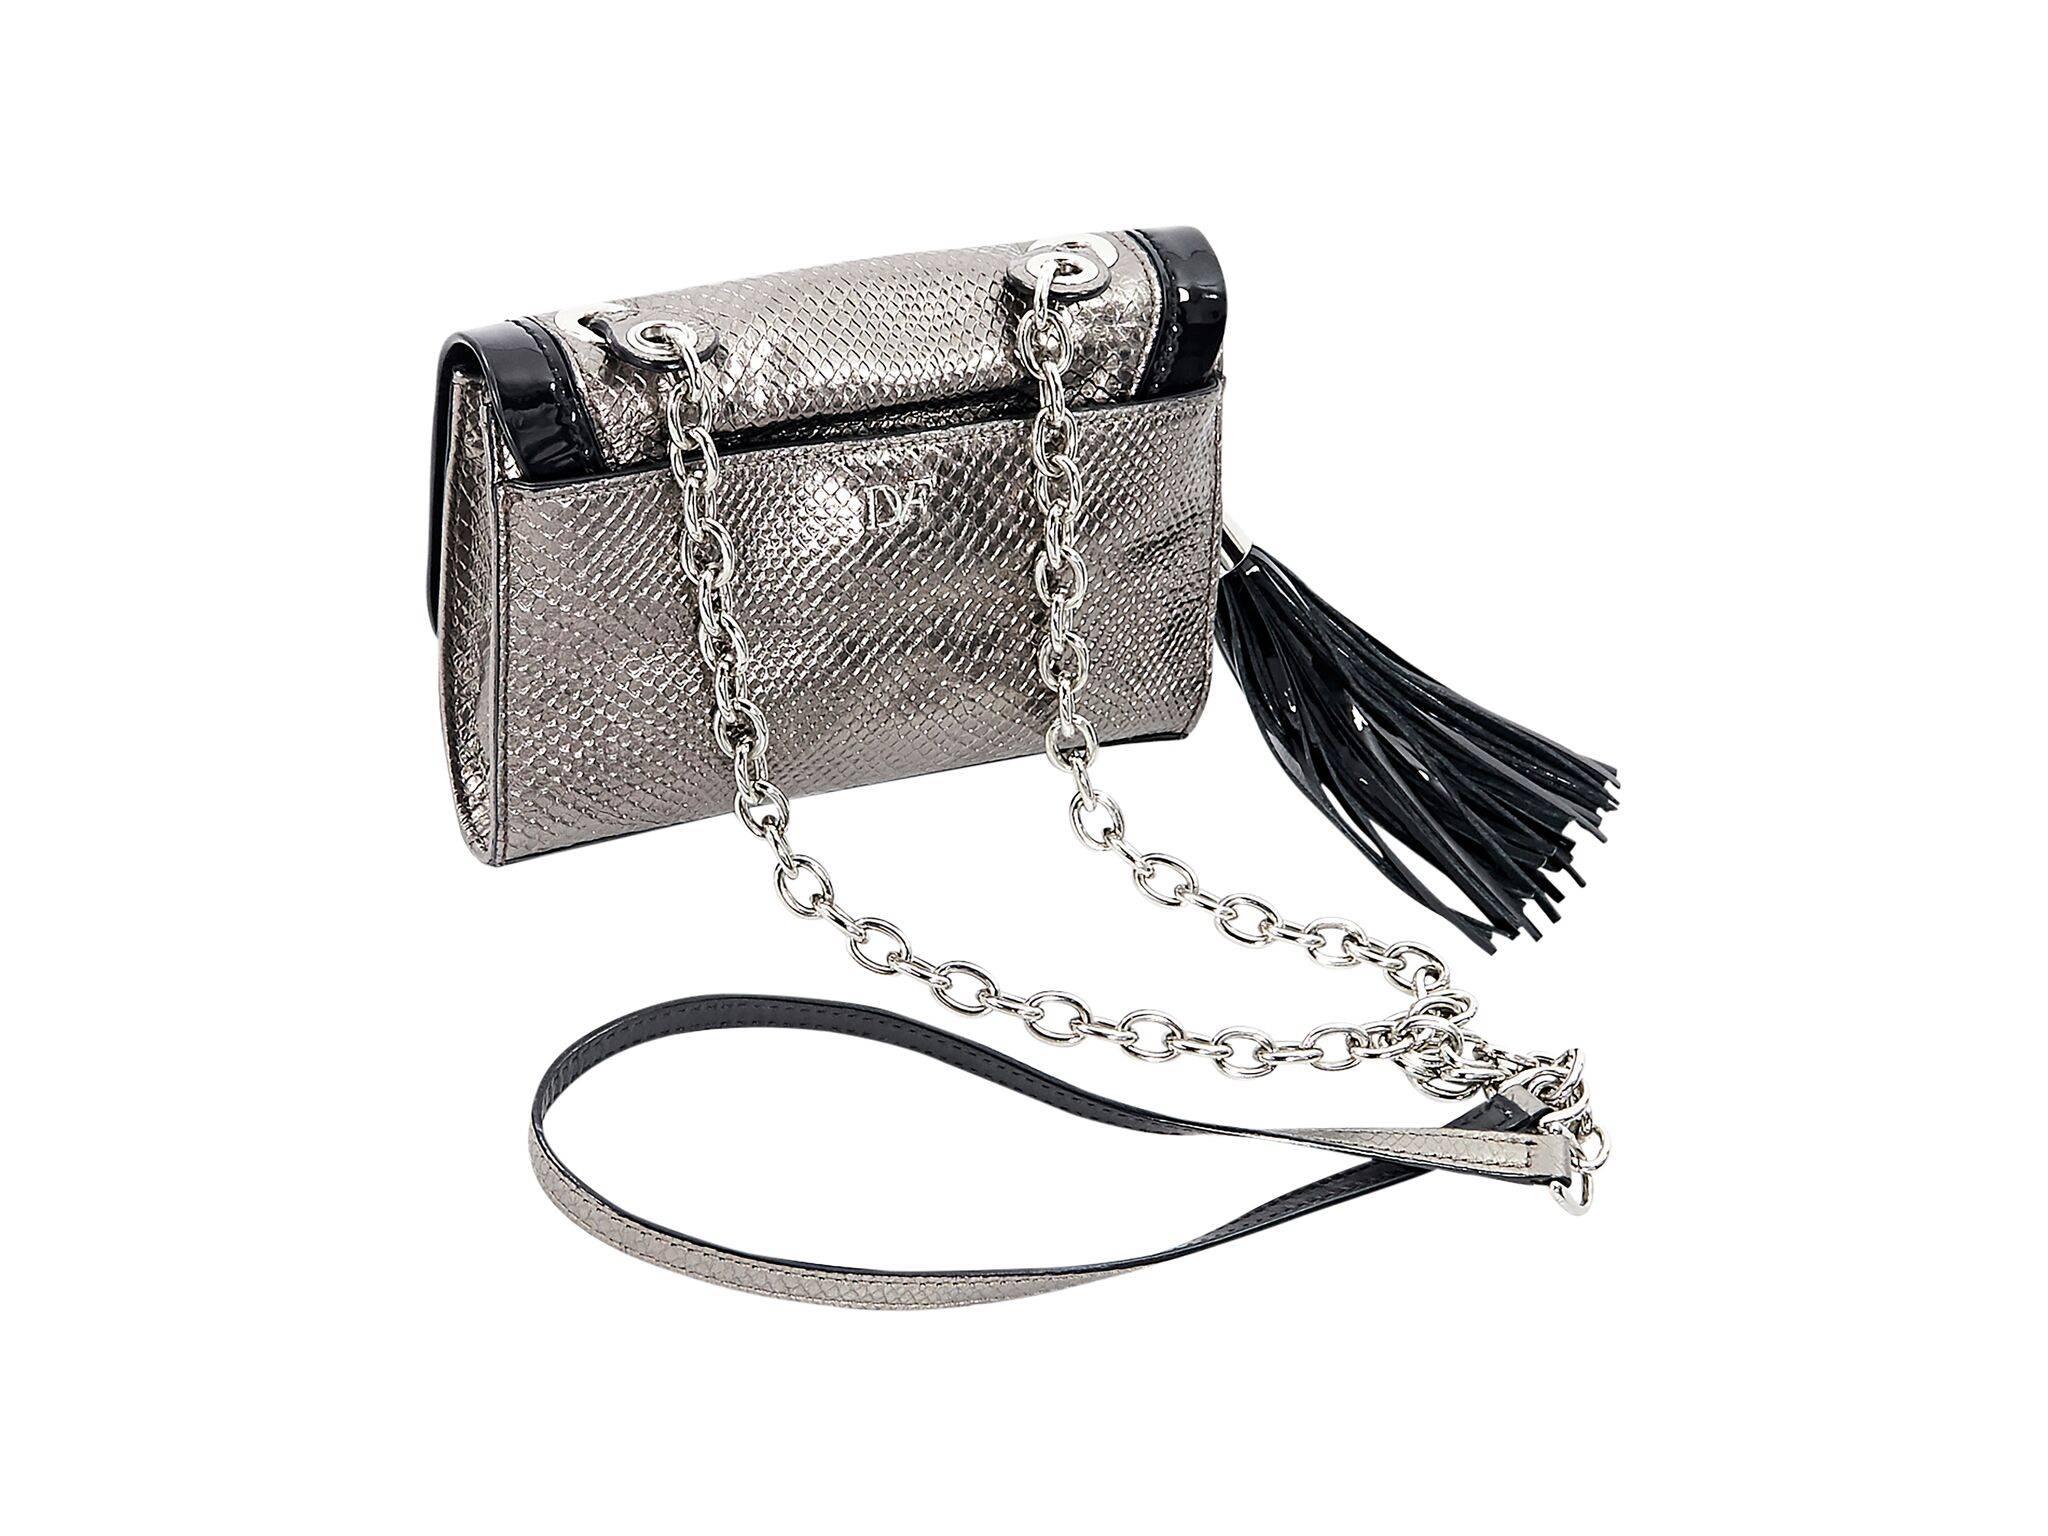 Product details:  Silver embossed leather mini crossbody bag by Diane von Furstenberg.  Trimmed with black patent leather.  Chain and leather crossbody strap.  Front flap with twist-lock closure.  Lined interior with inner zip pocket.  Side tassel